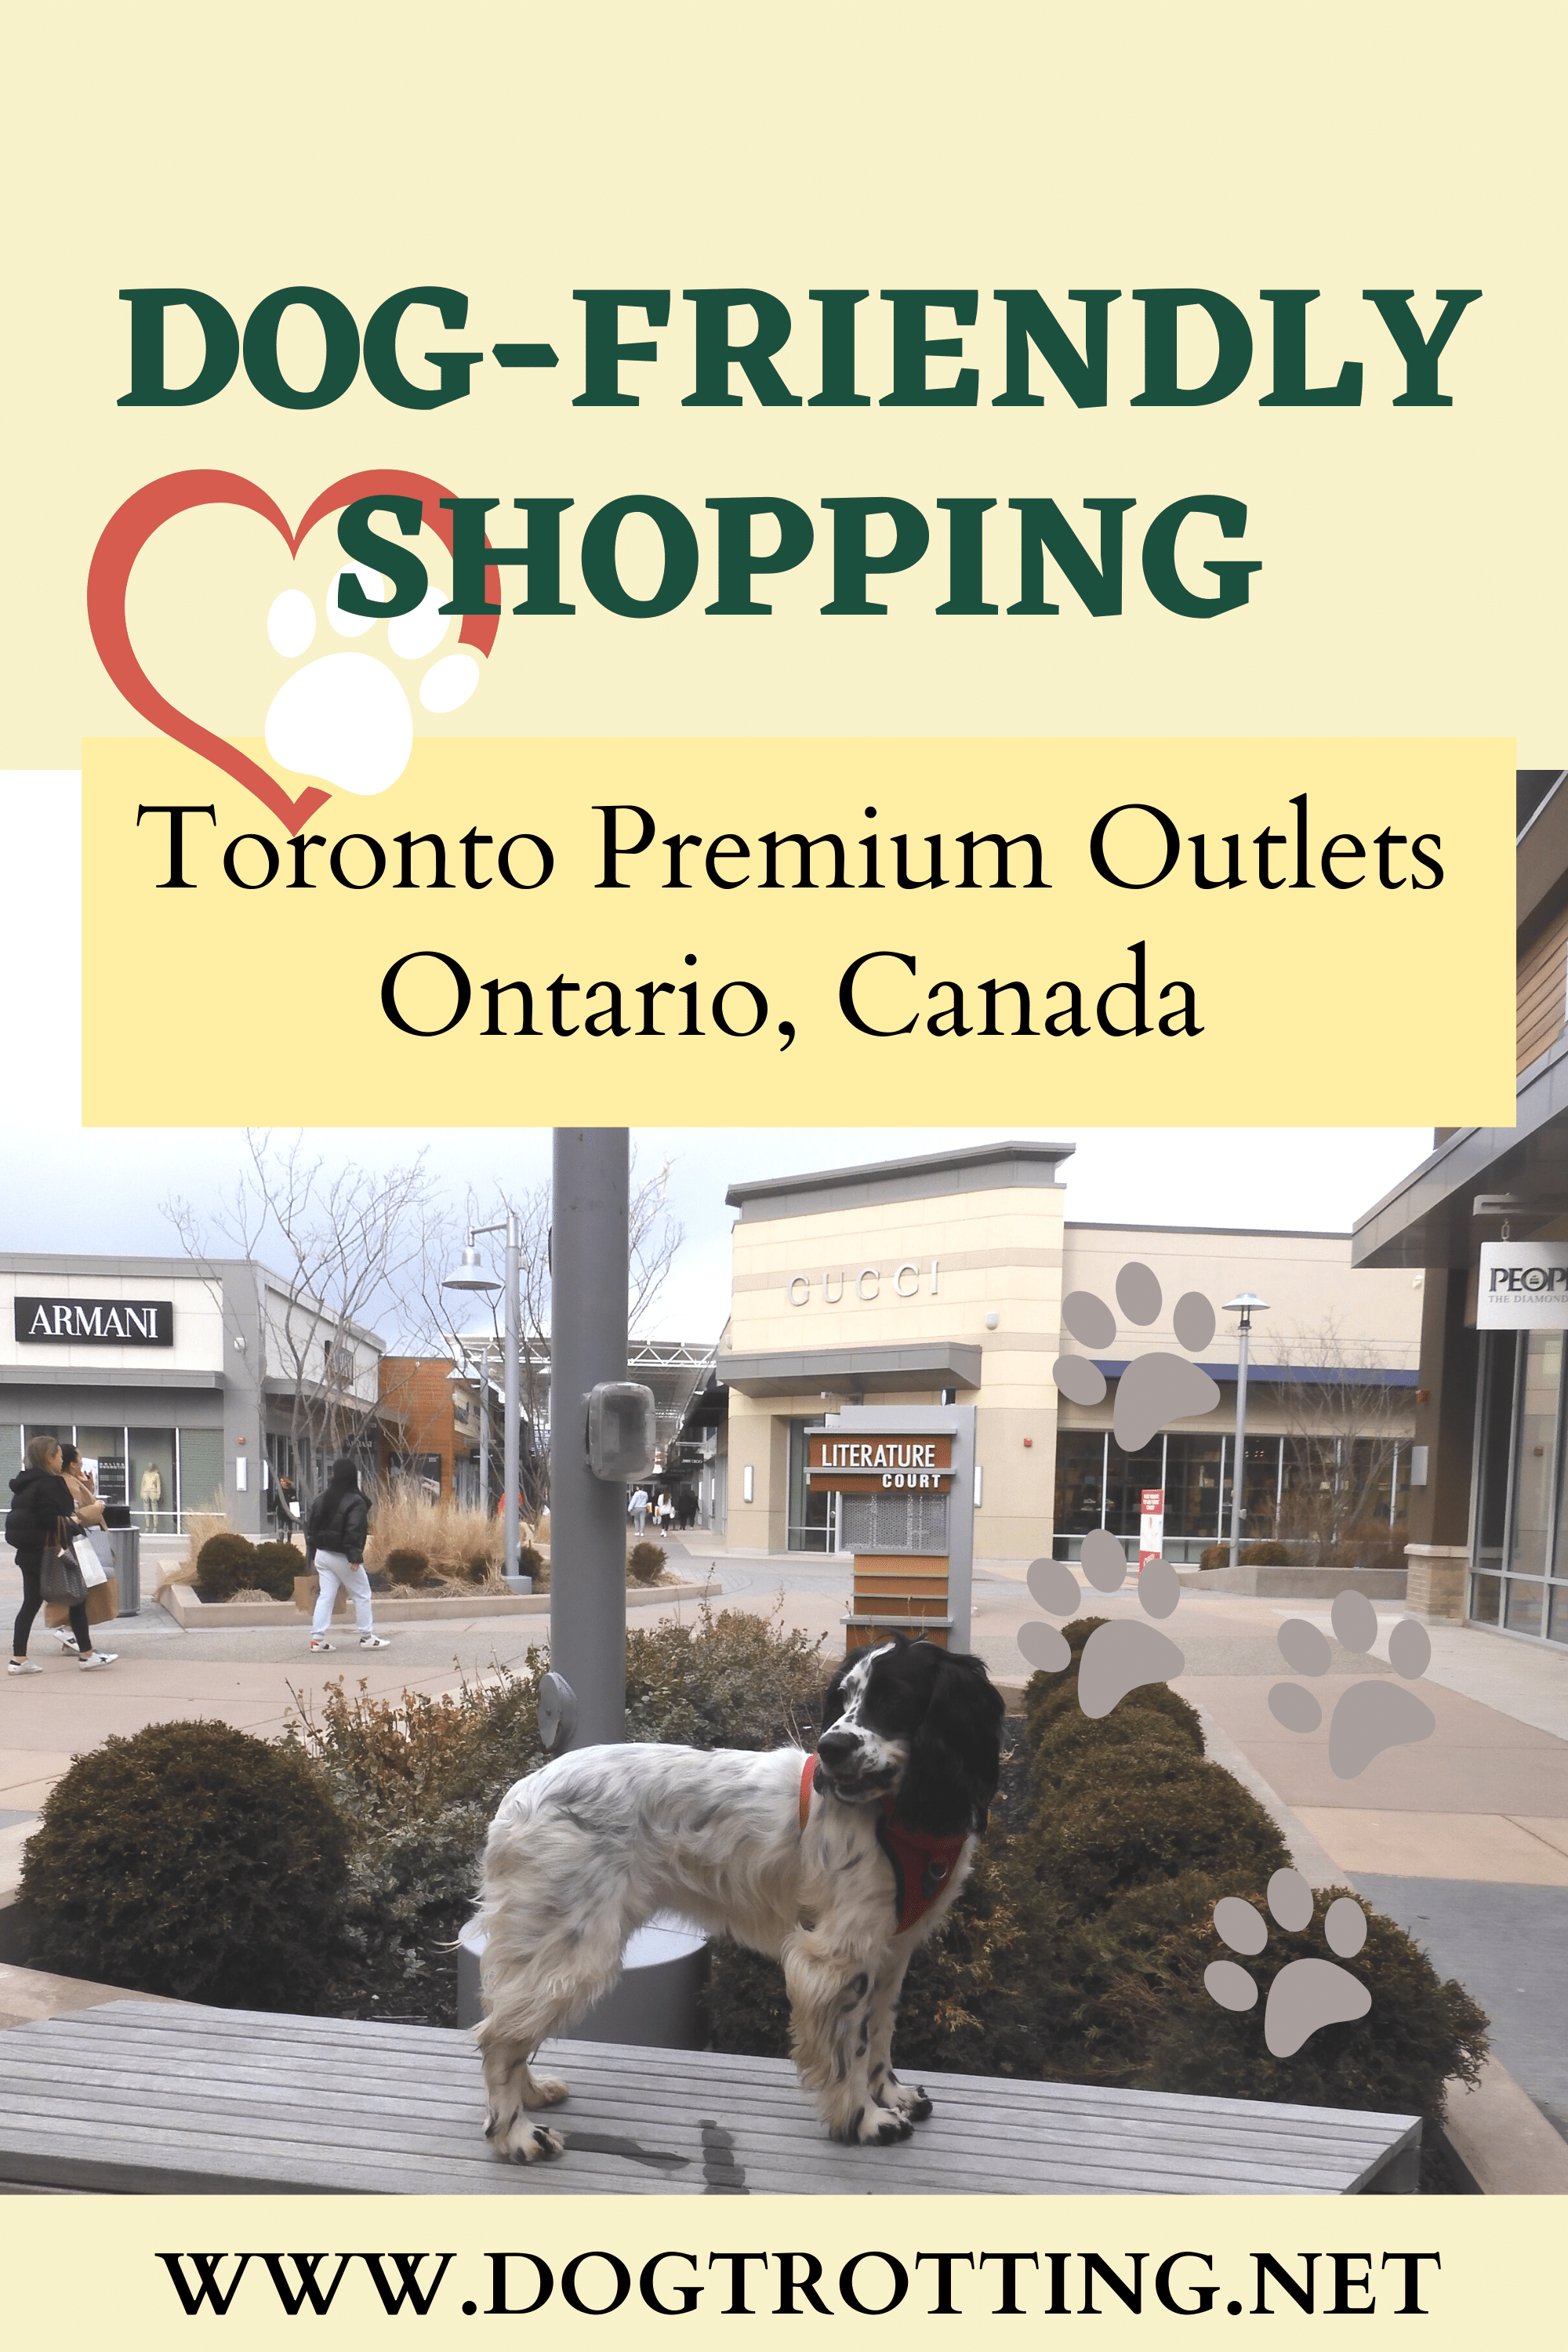 dog on bench promoting dog friendly shopping at Toronto Premium Outlets